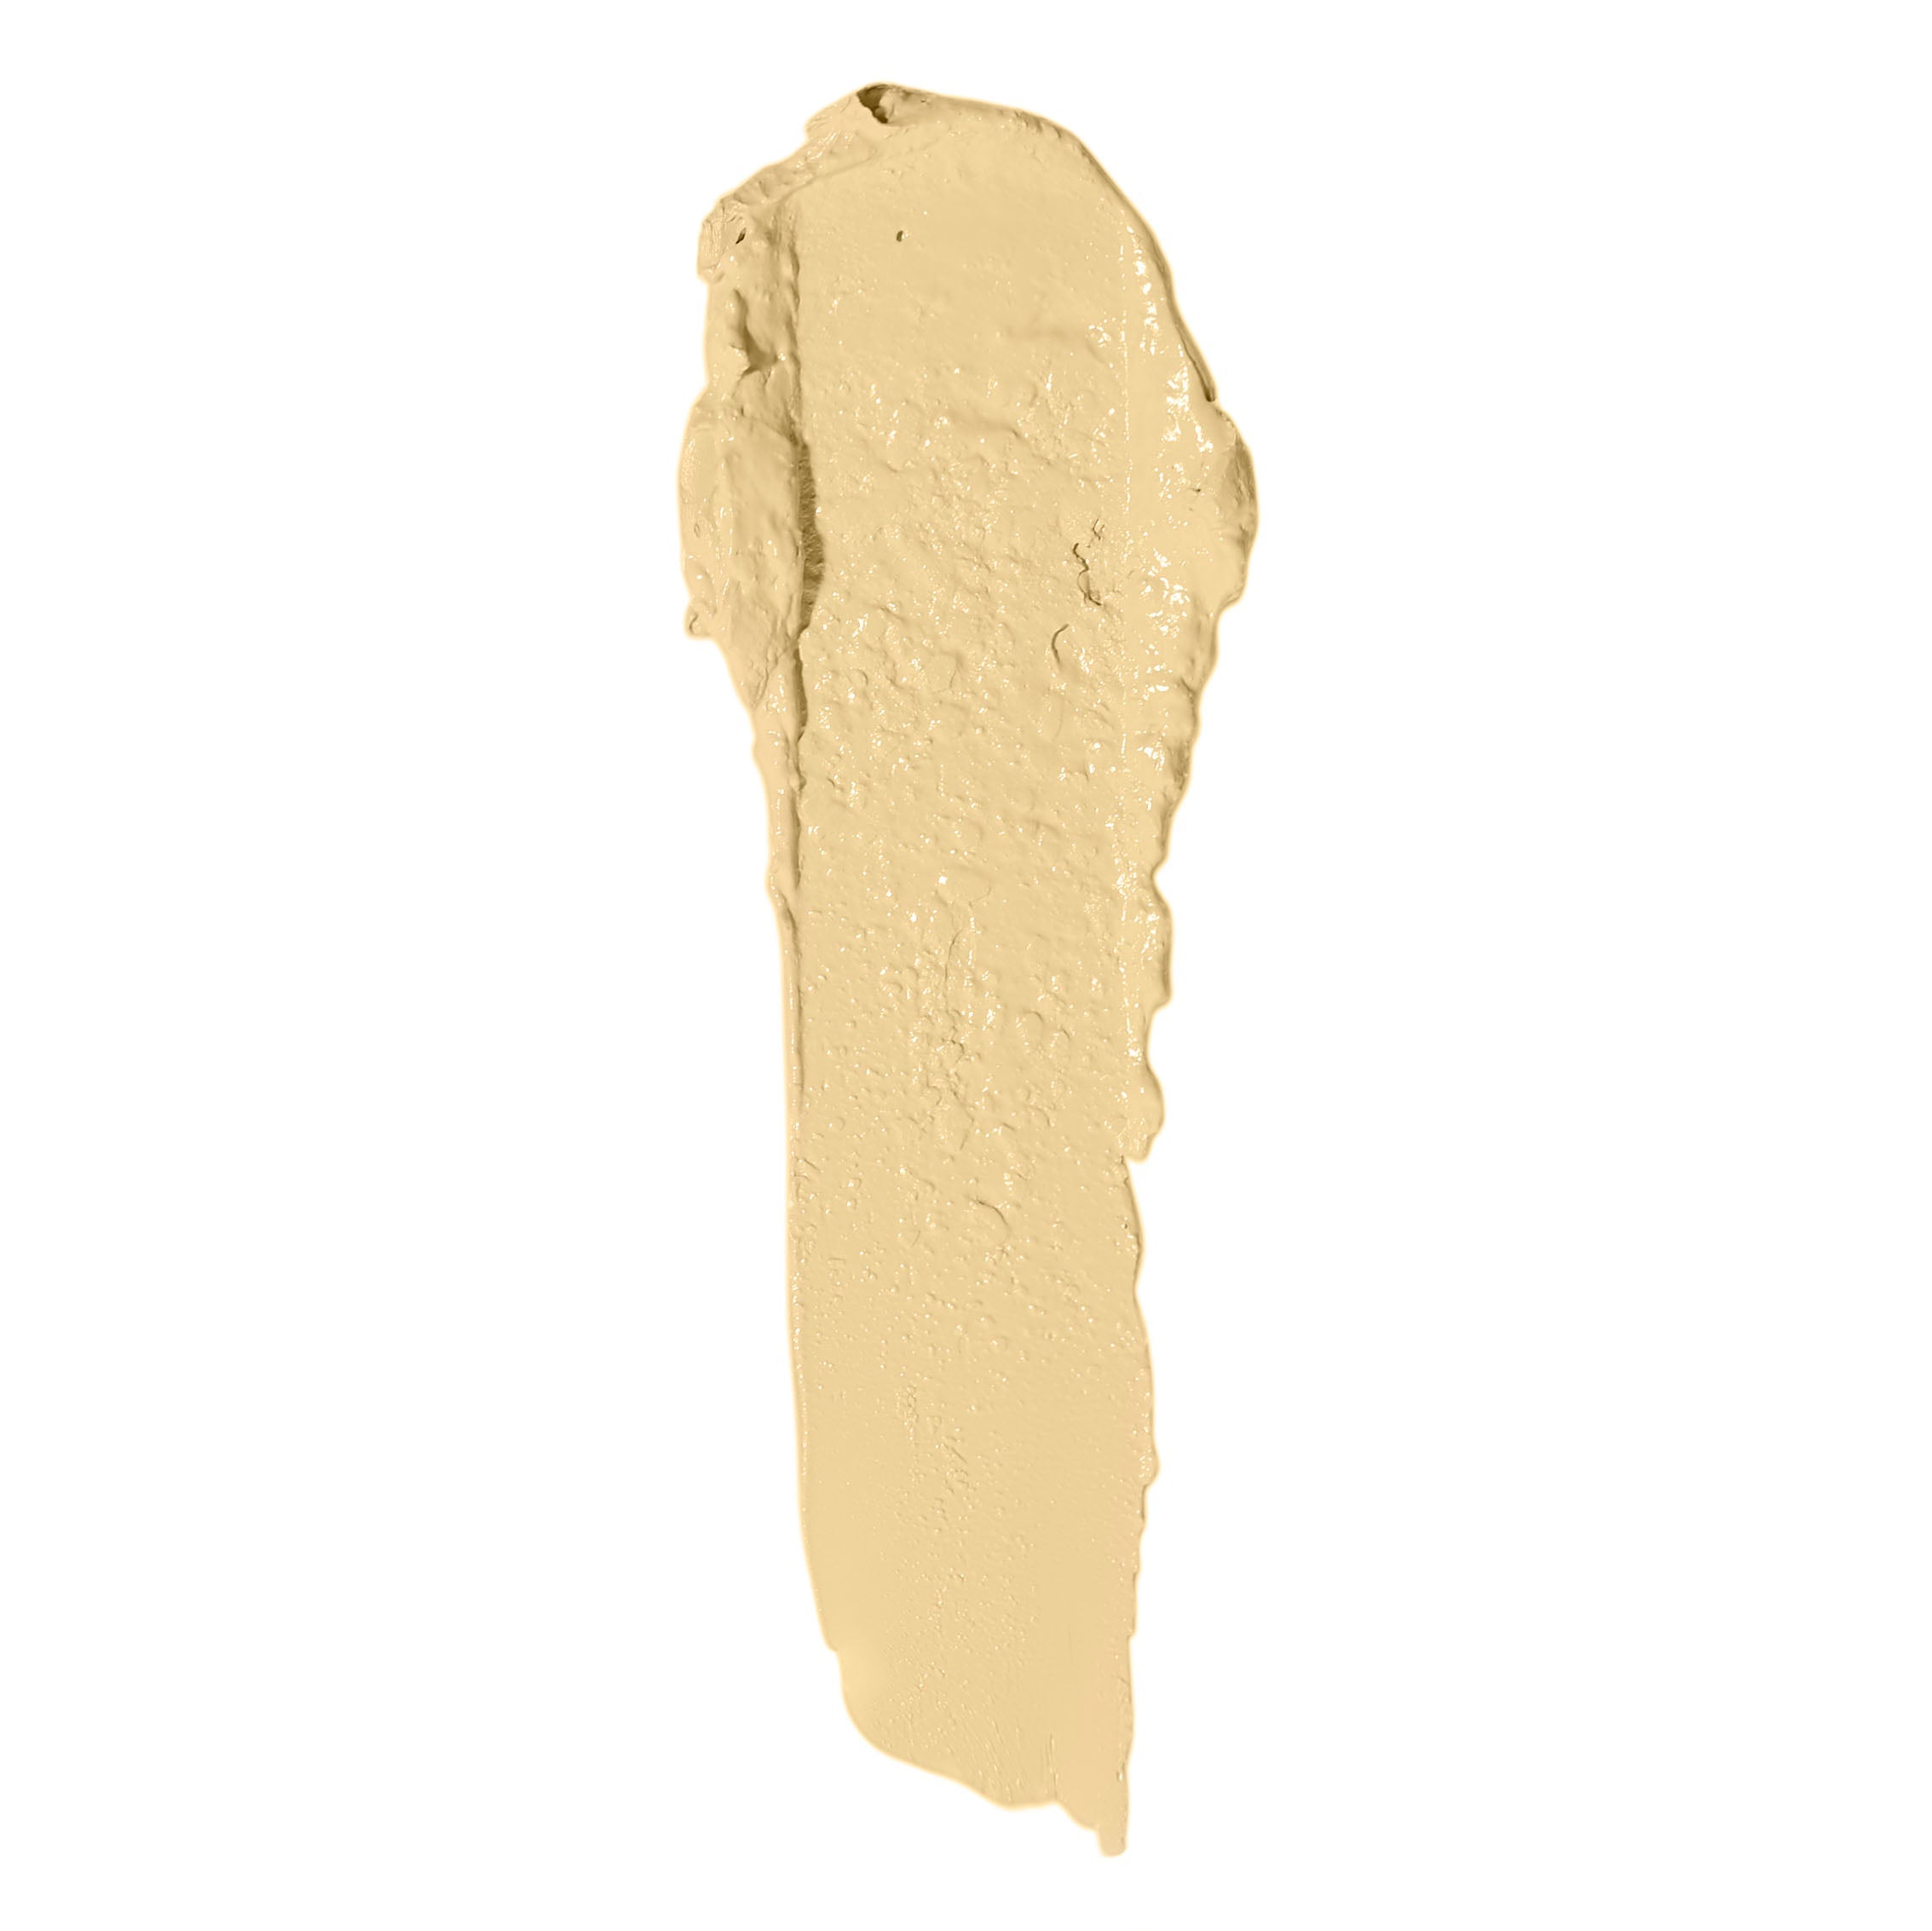 Blunder Cover an All-In-One Foundation/Concealer Shade - Eins.5 - 1